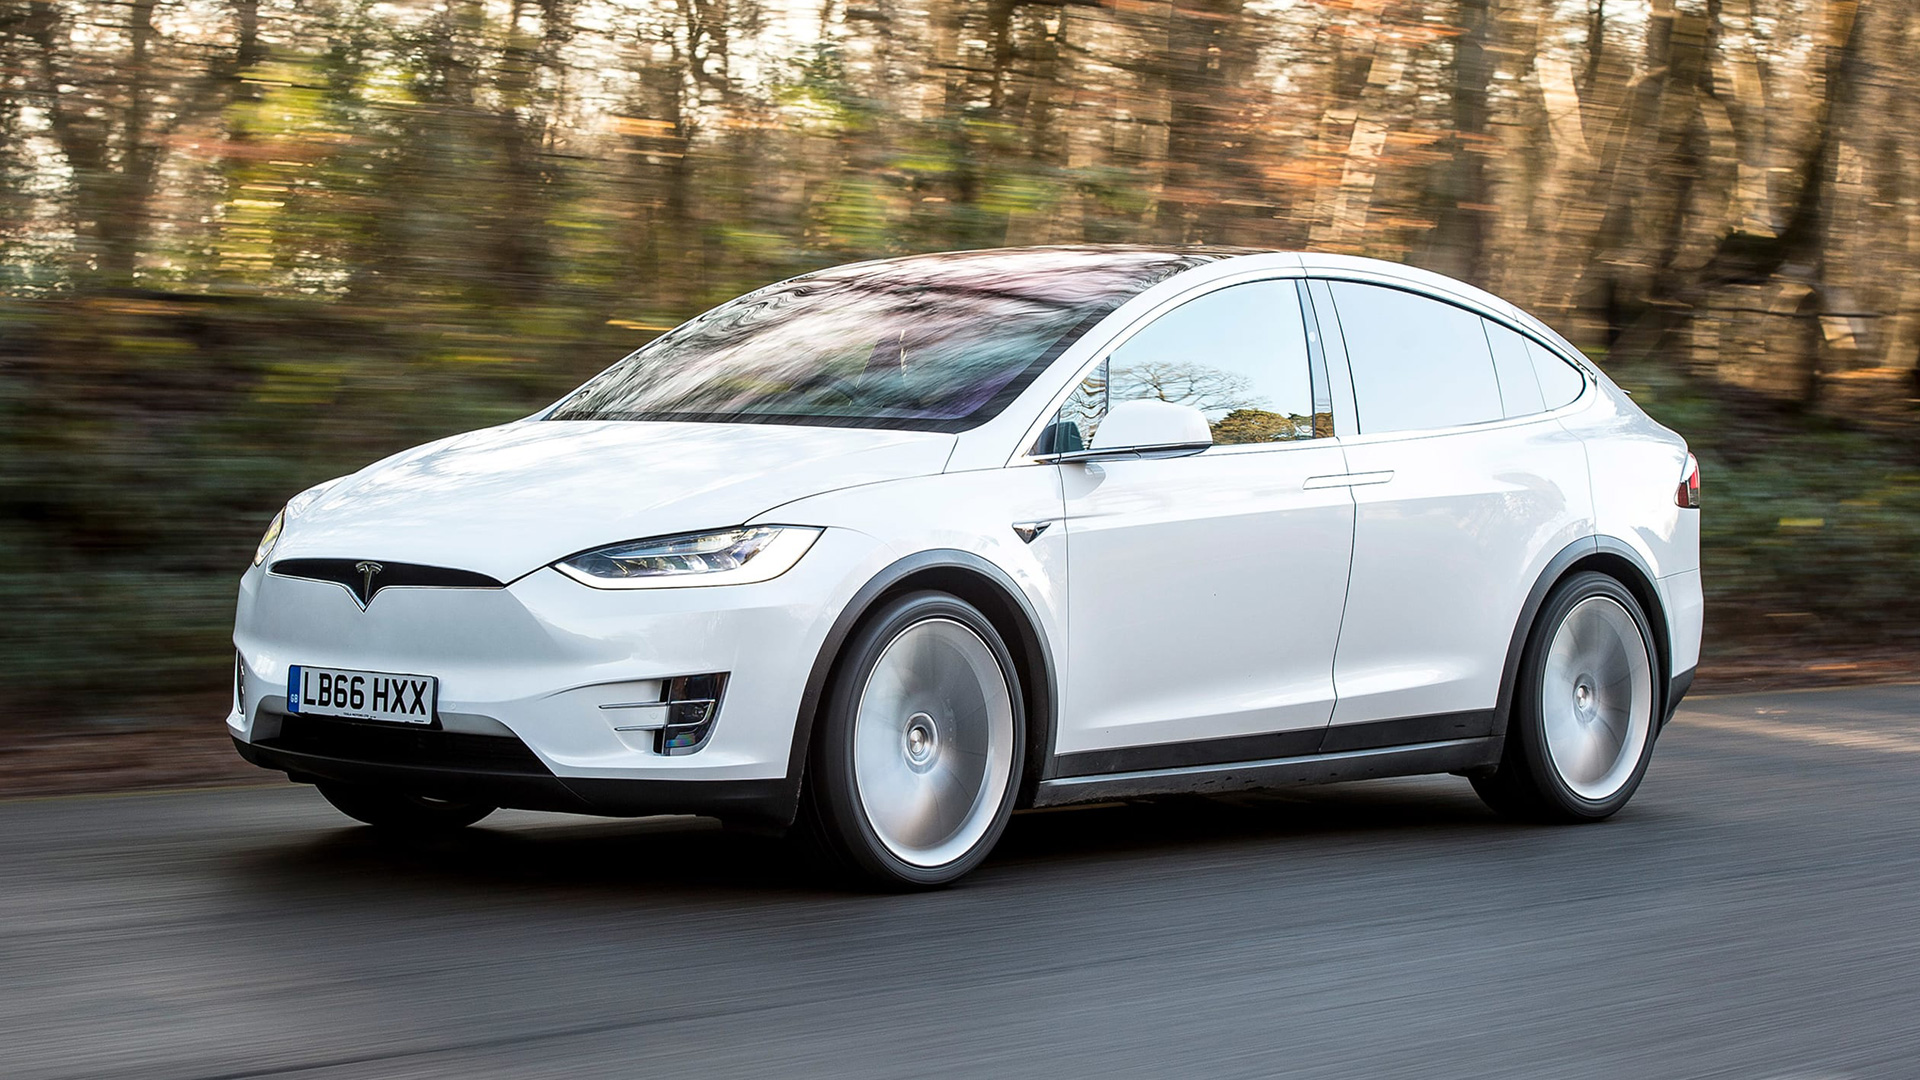 Tesla electric cars cover higher annual mileages than cars from any